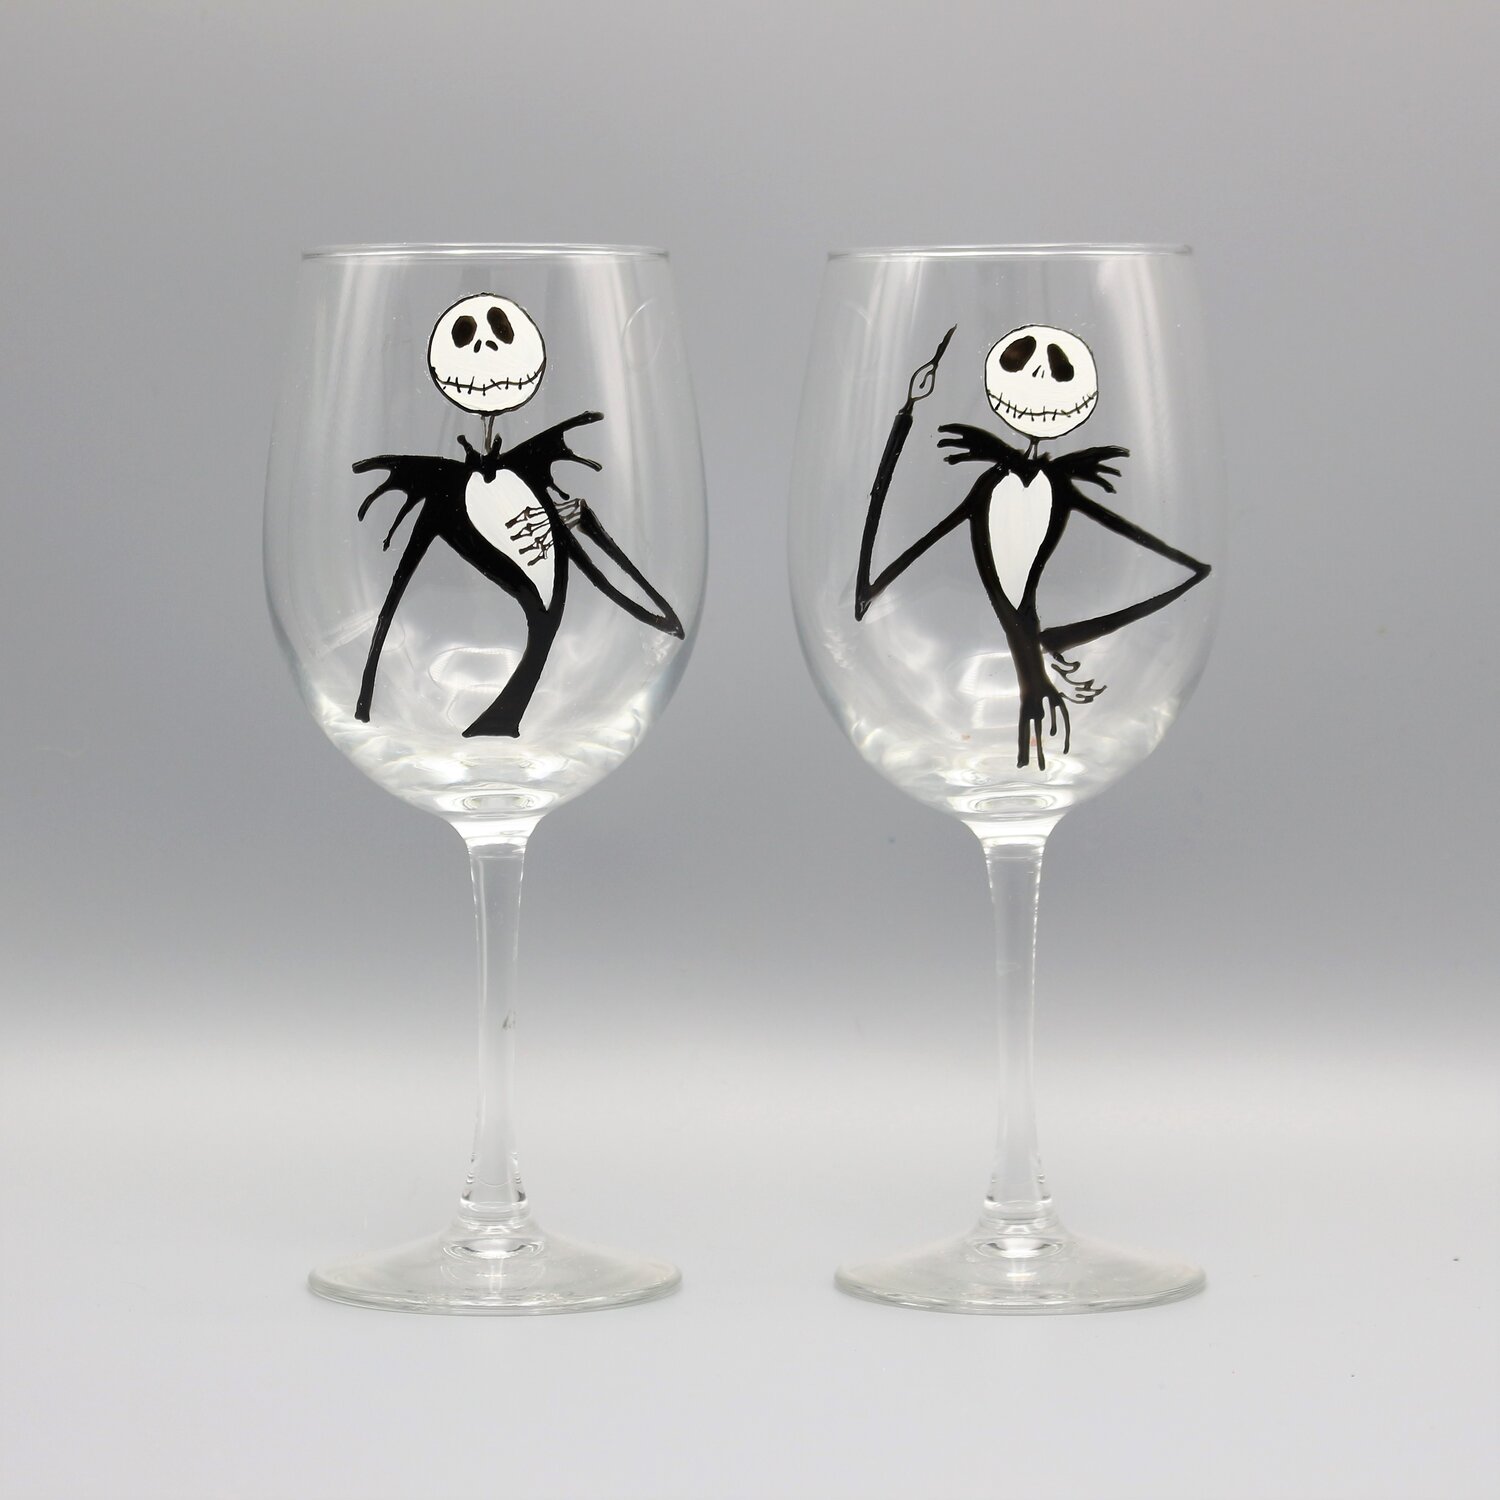 Glassware gift, Personalized glass, Types of wine glasses